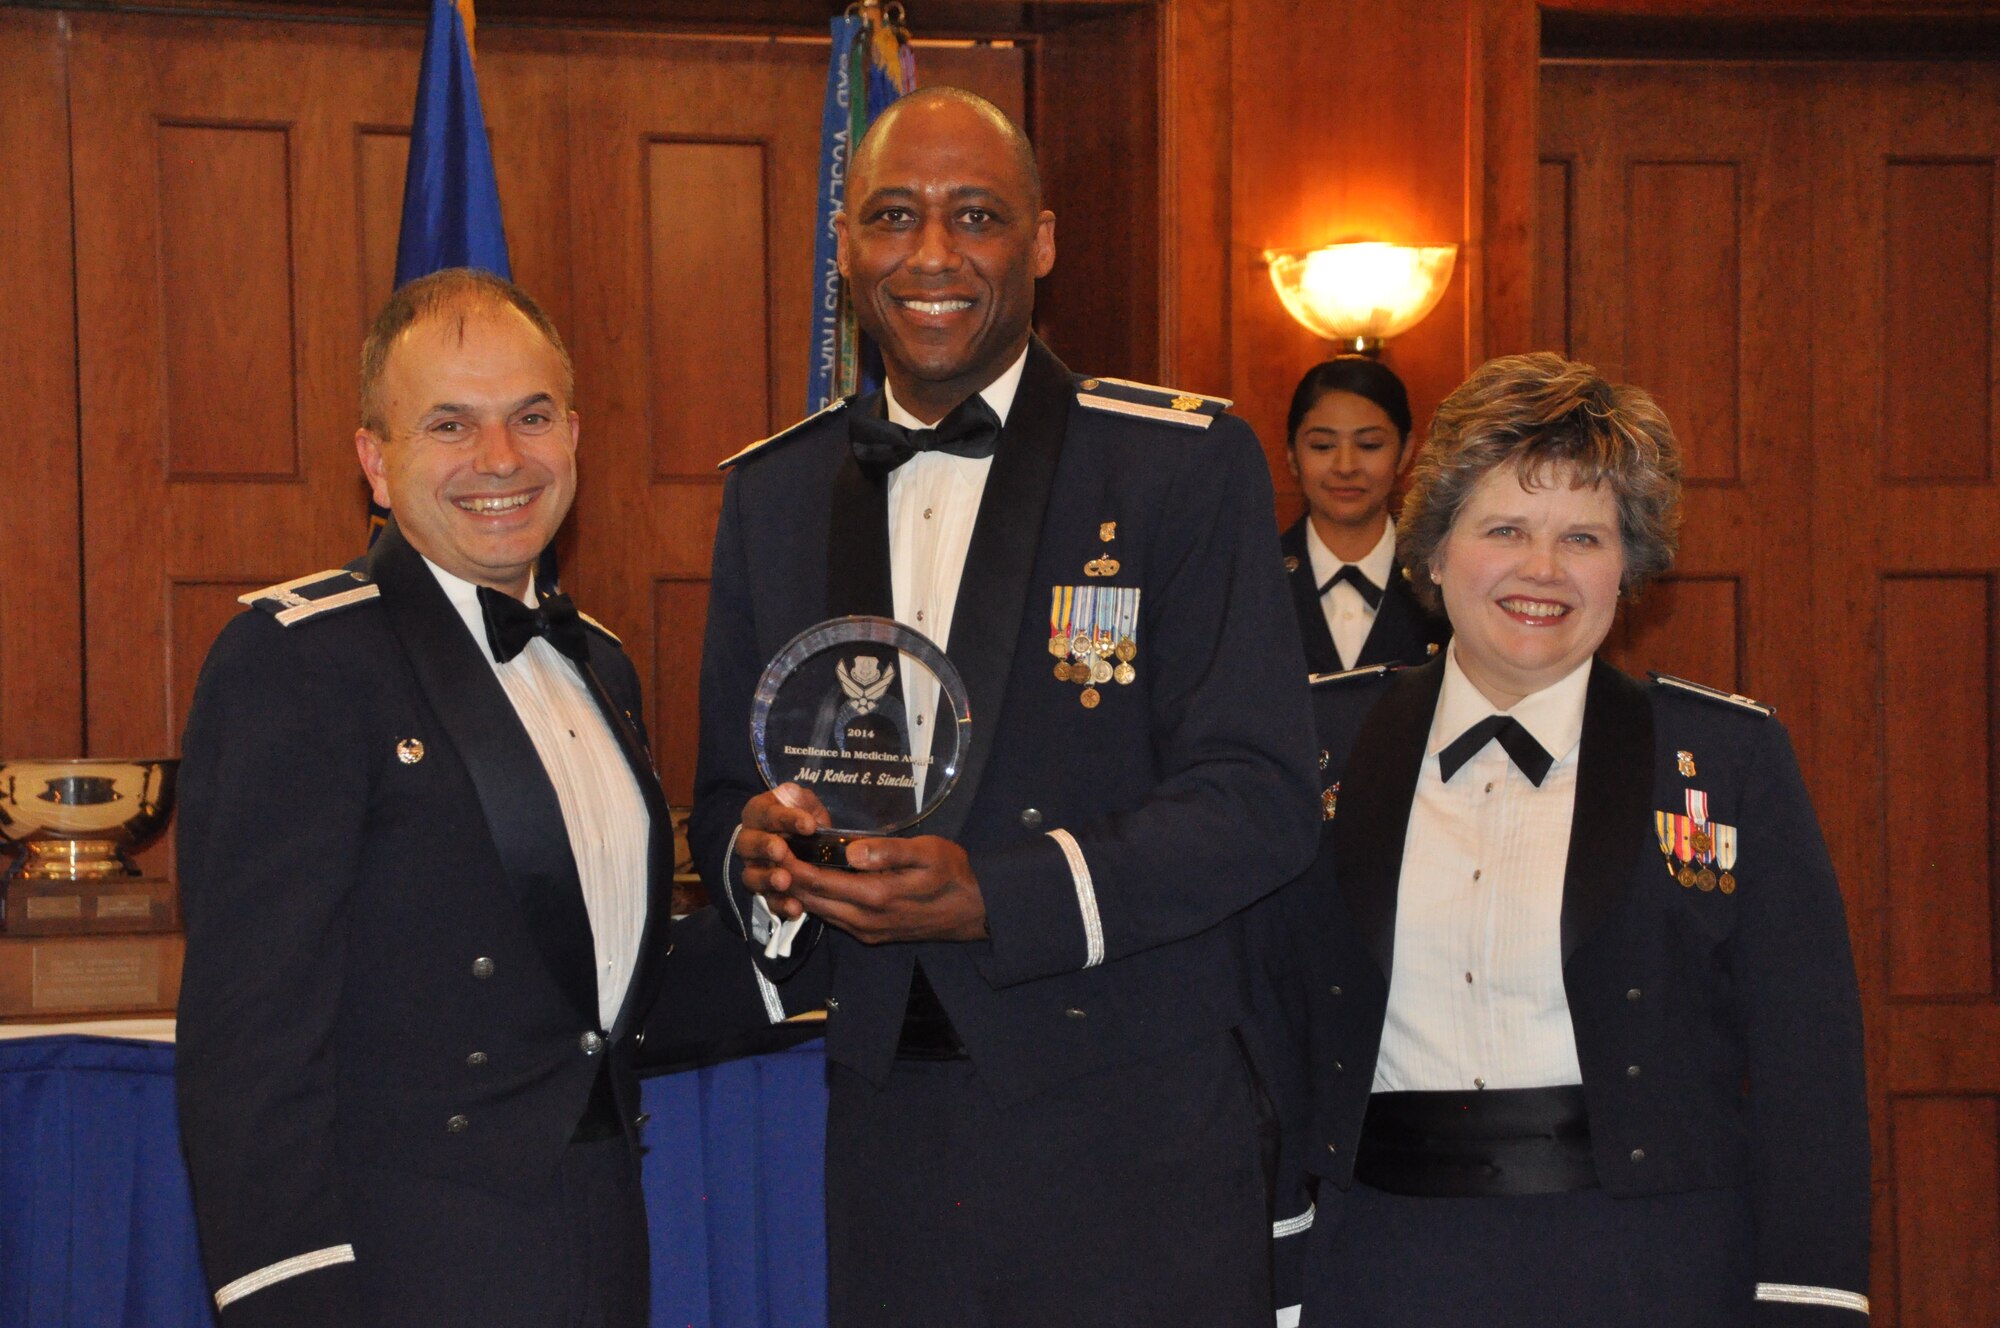 Maj. Robert Sinclair, 459th Aeromedical Staging Squadron, wins the Medical Group Excellence Award at the 459 ARW Annual Awards Banquet on Saturday, March 7, 2015. He is flanked by his commander, Col. Oba Vincent, 459 ASTS, and Col. Christine Barber, 459 AMDS commander. (Air Force Photo / SrA Kristin Kurtz)
